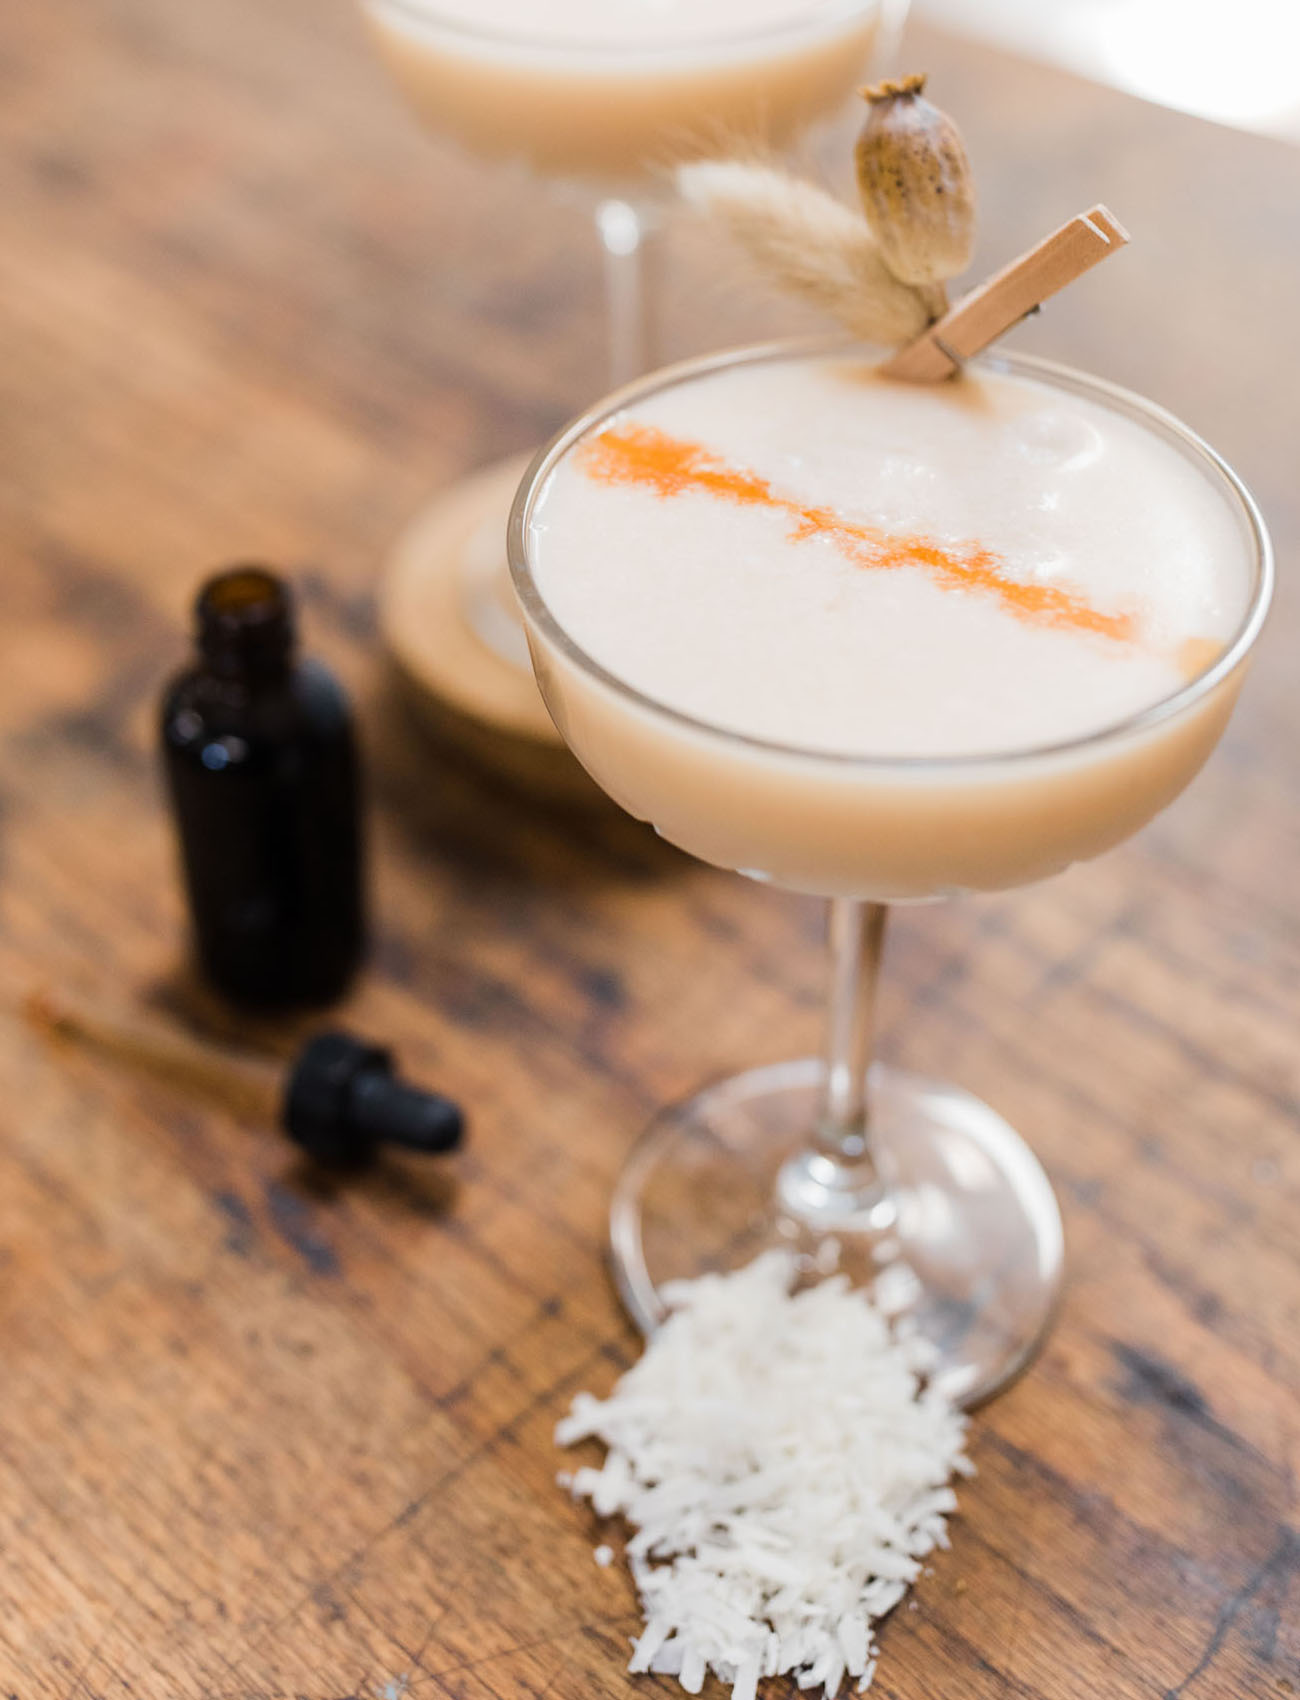 coconut inspired cocktails